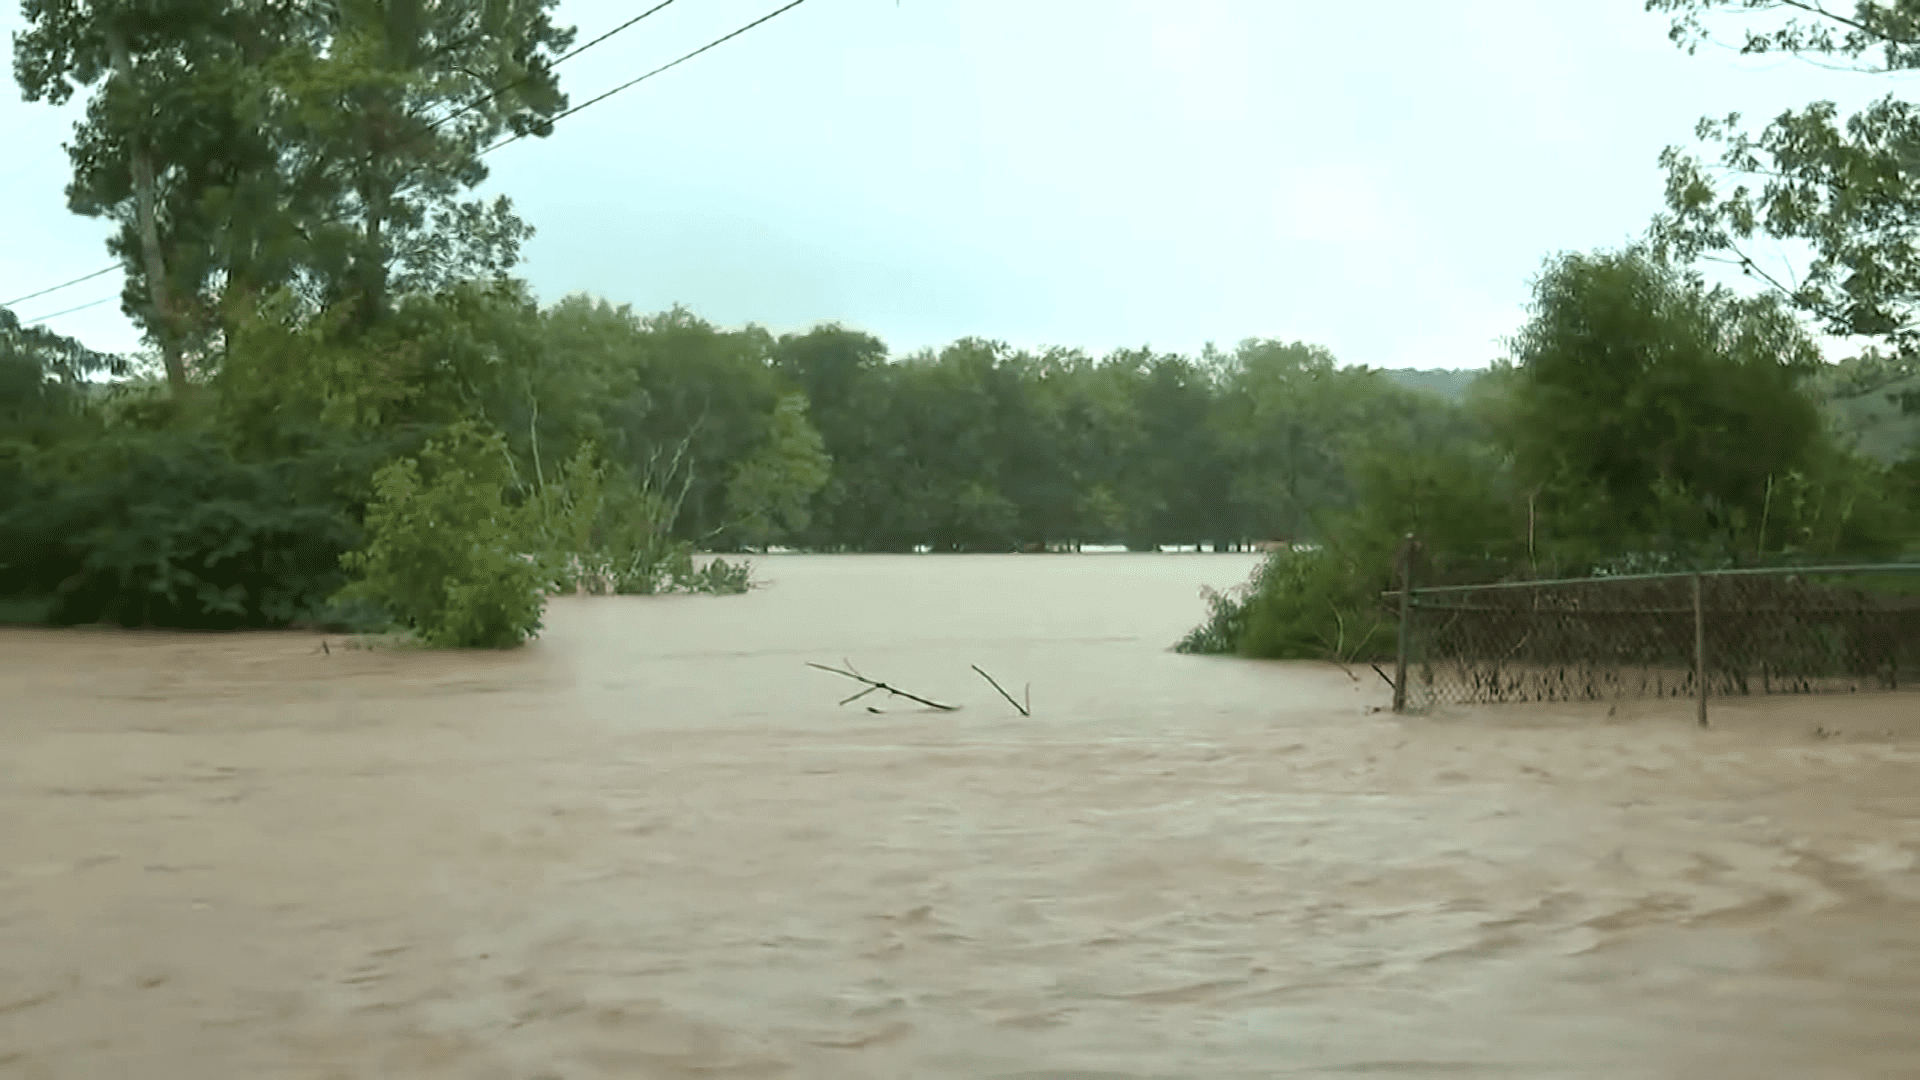 Photo of flooding on the St. Louis river.